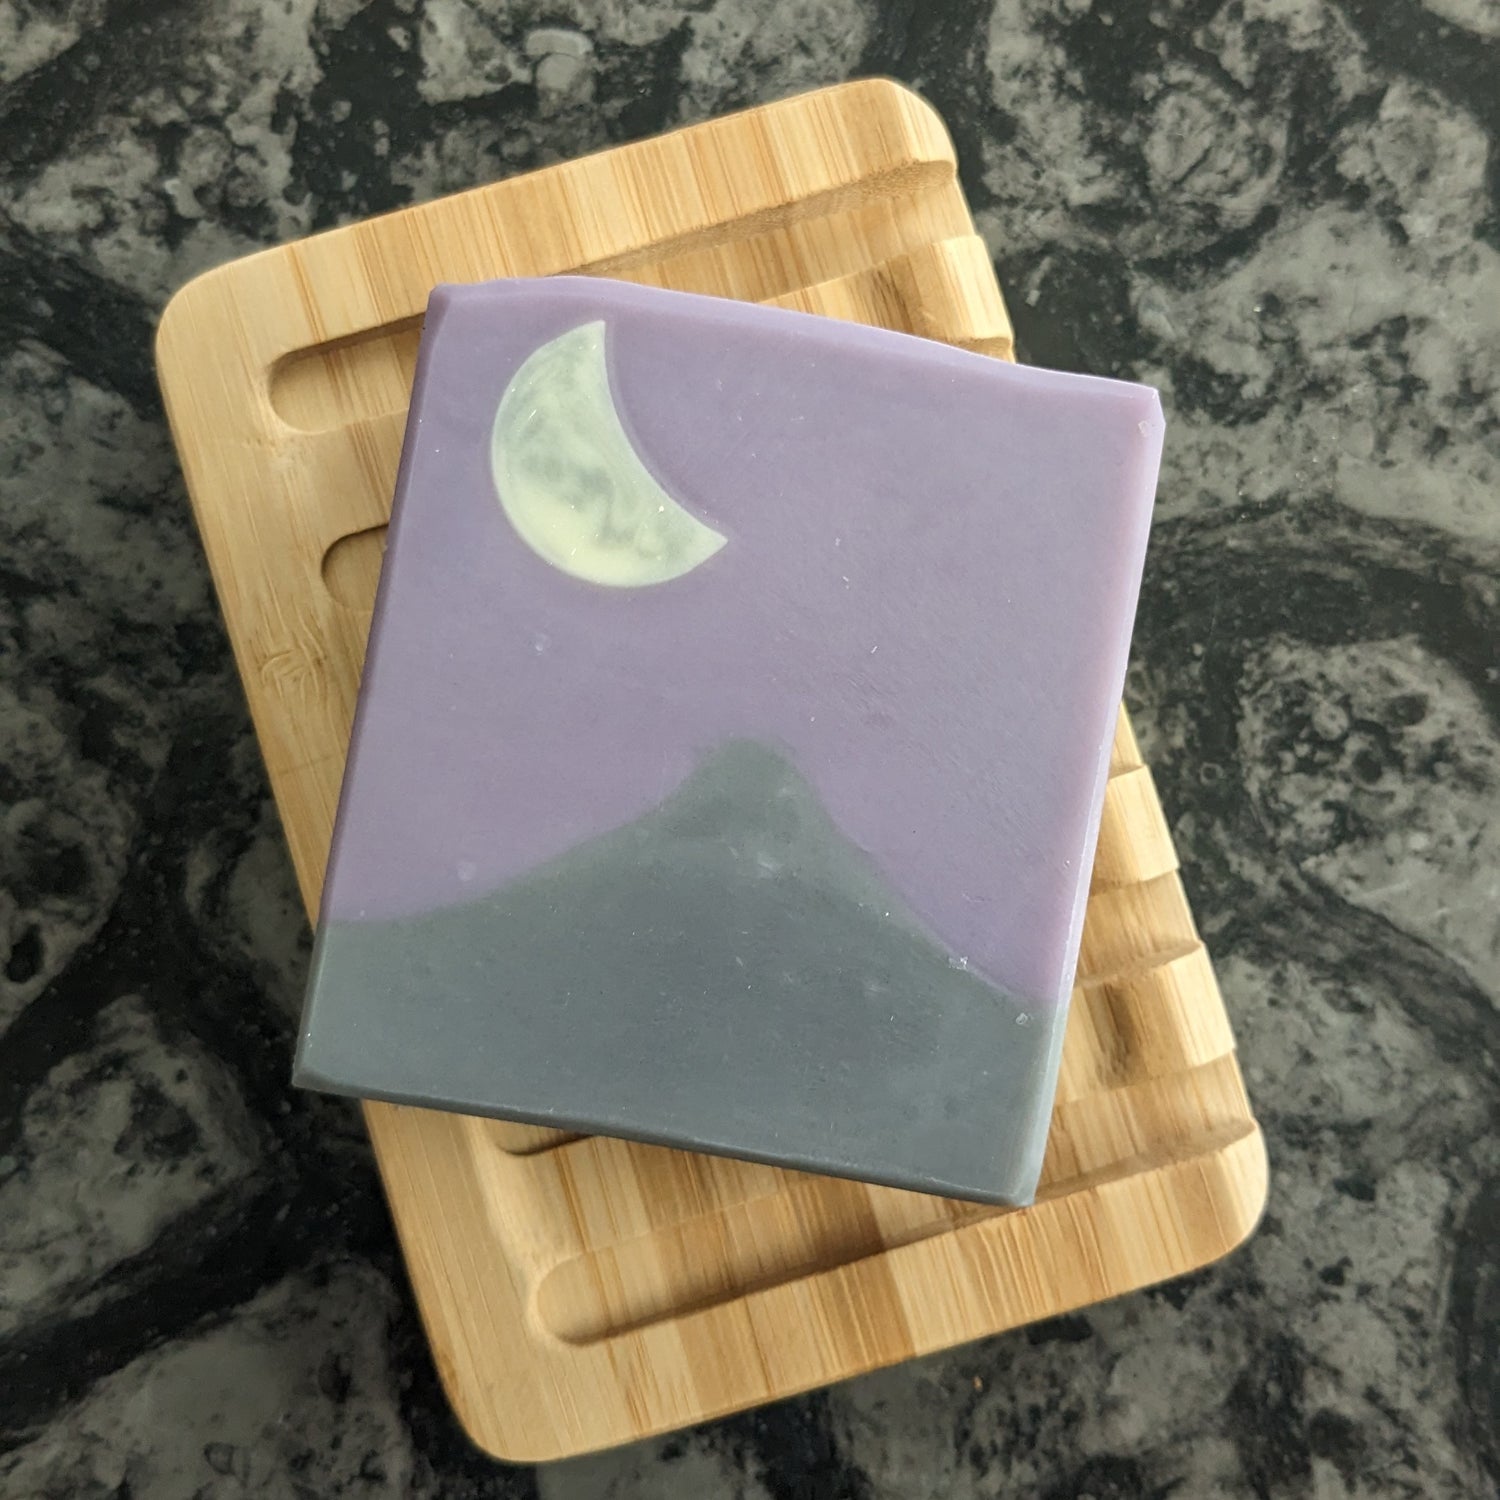 Soap with mountain, purple sky and moon design on soap dish